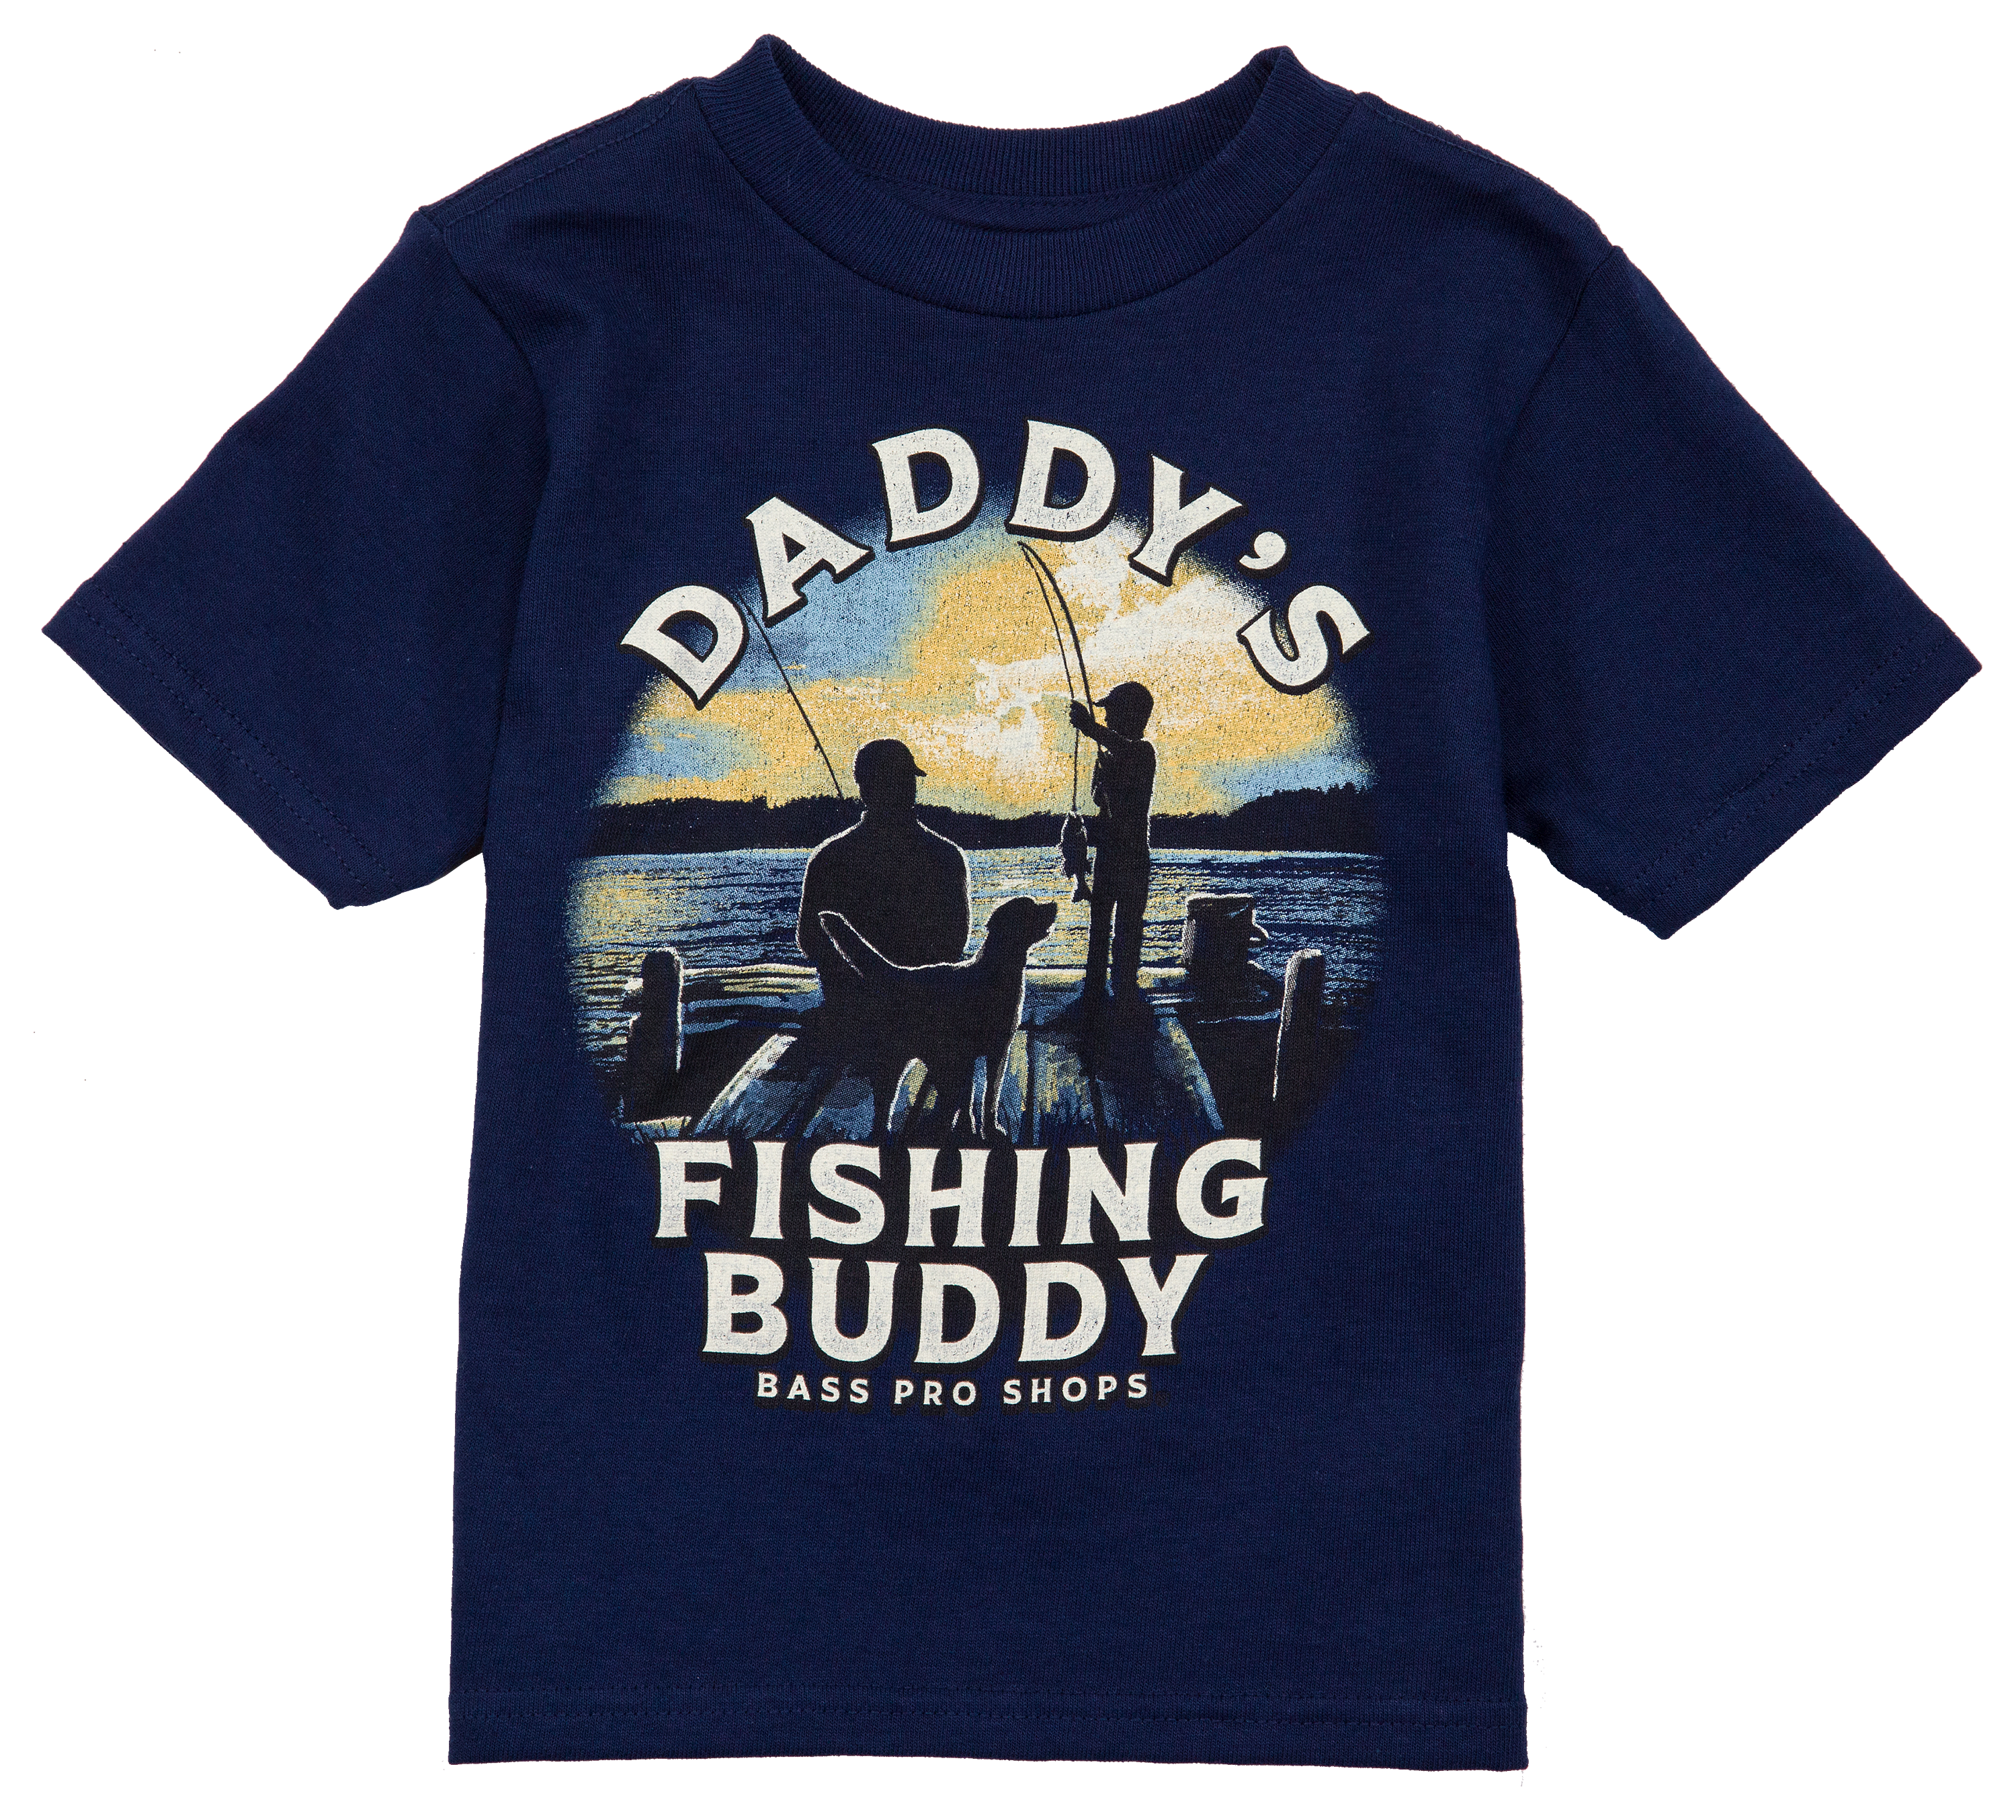 Bass Pro Shops Fishing Buddy Short-Sleeve T-Shirt for Toddlers or Boys